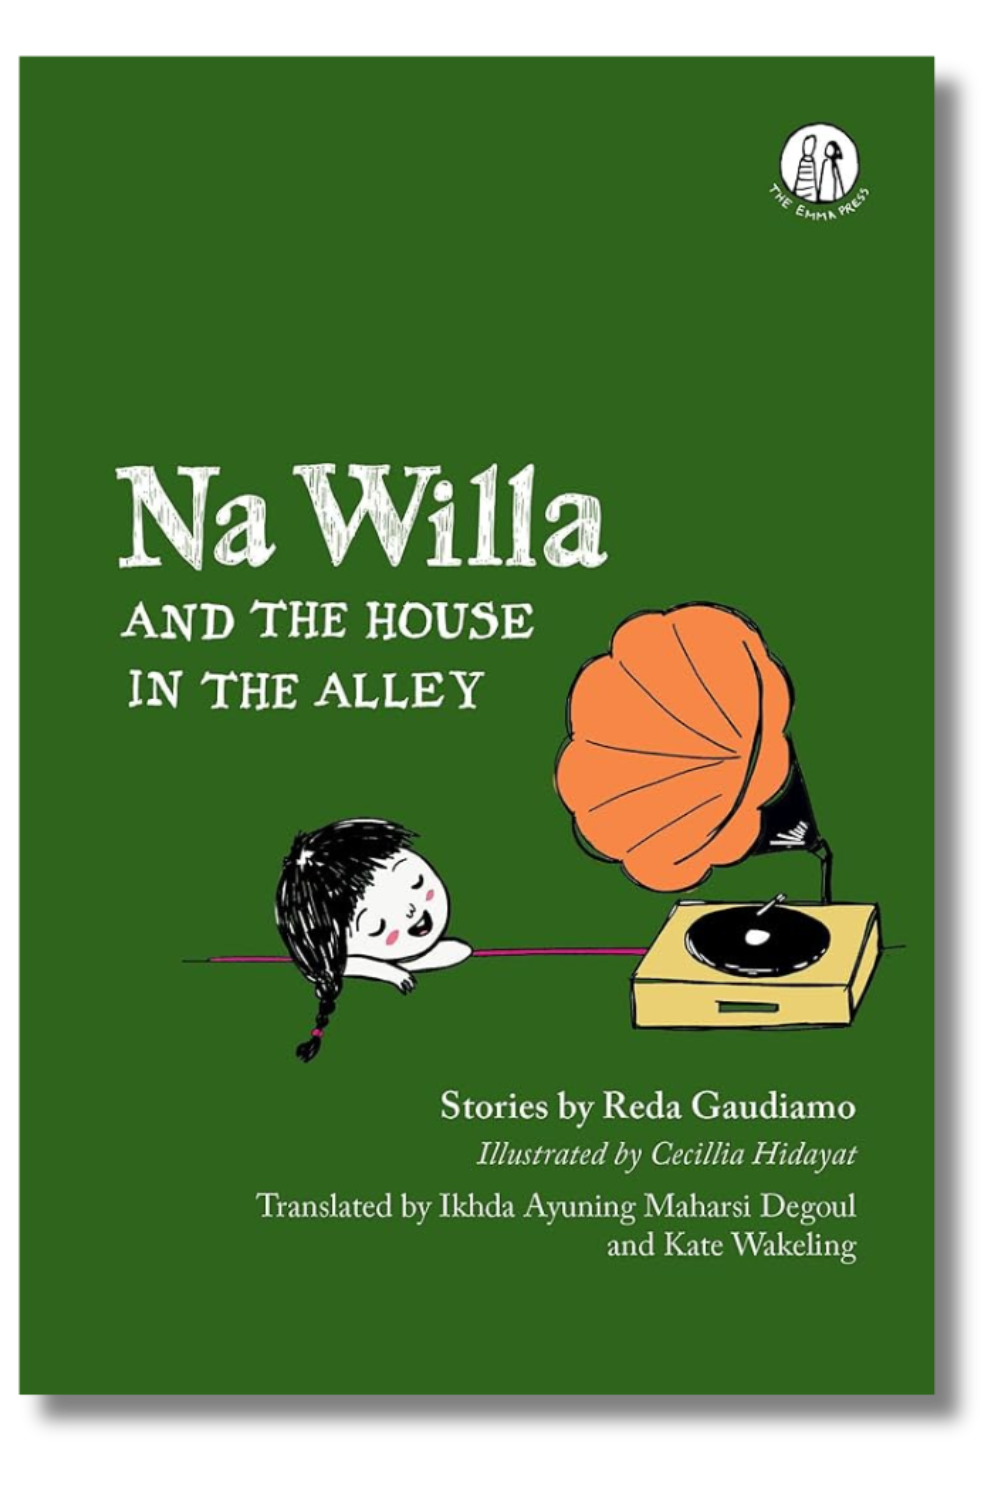 The cover of "Na Willa and the House in the Alley" by Reda Gaudiamo